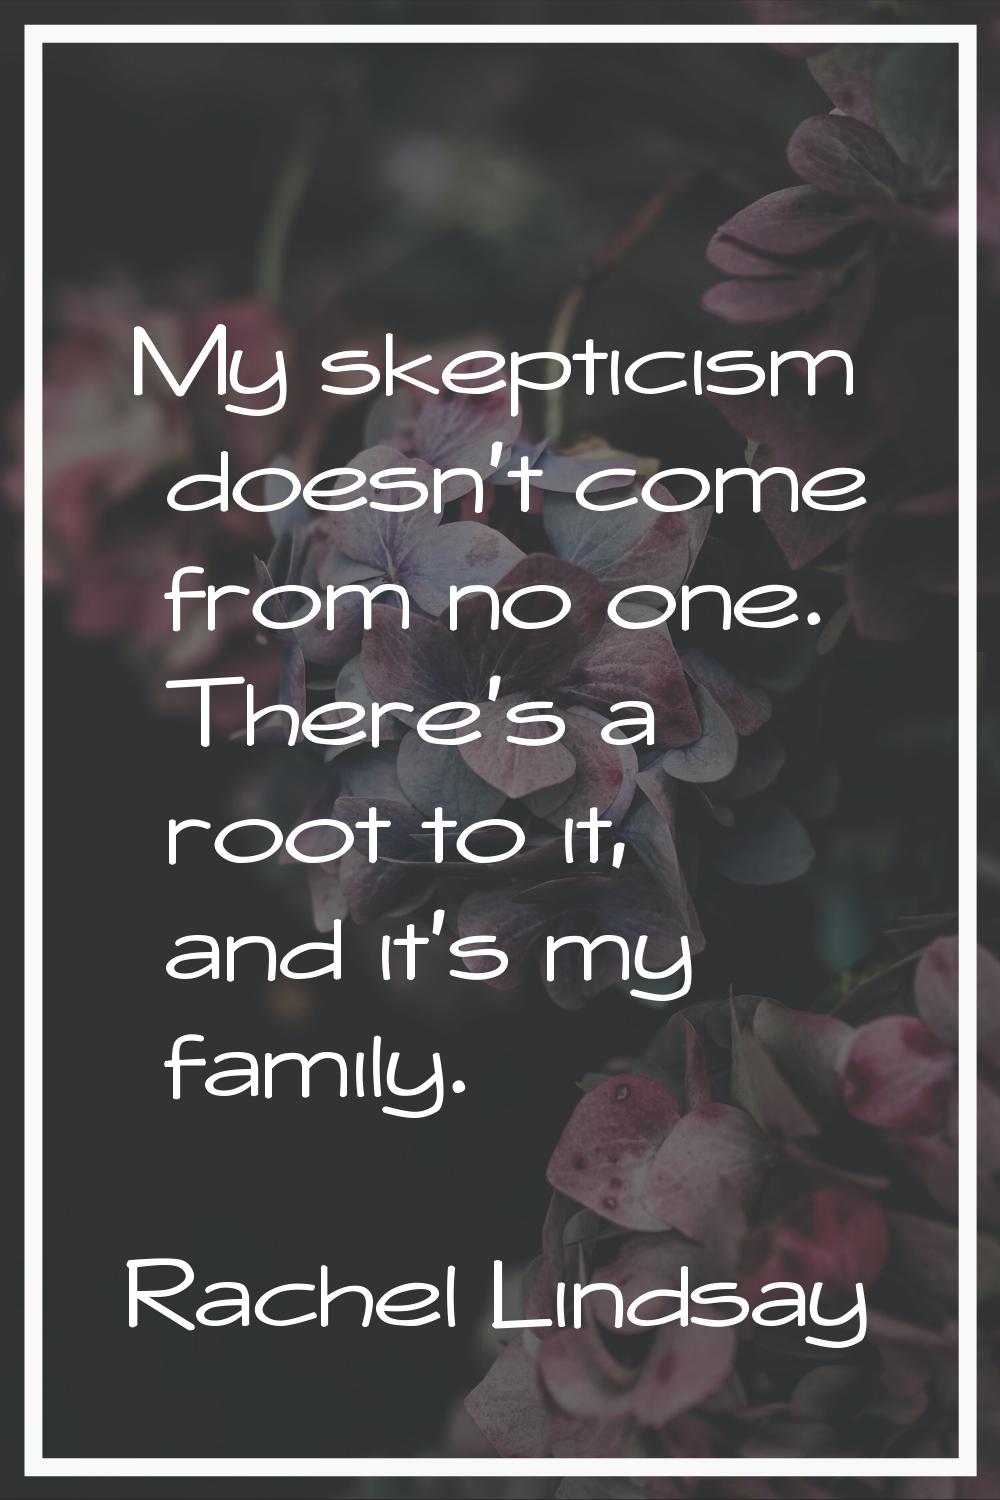 My skepticism doesn't come from no one. There's a root to it, and it's my family.